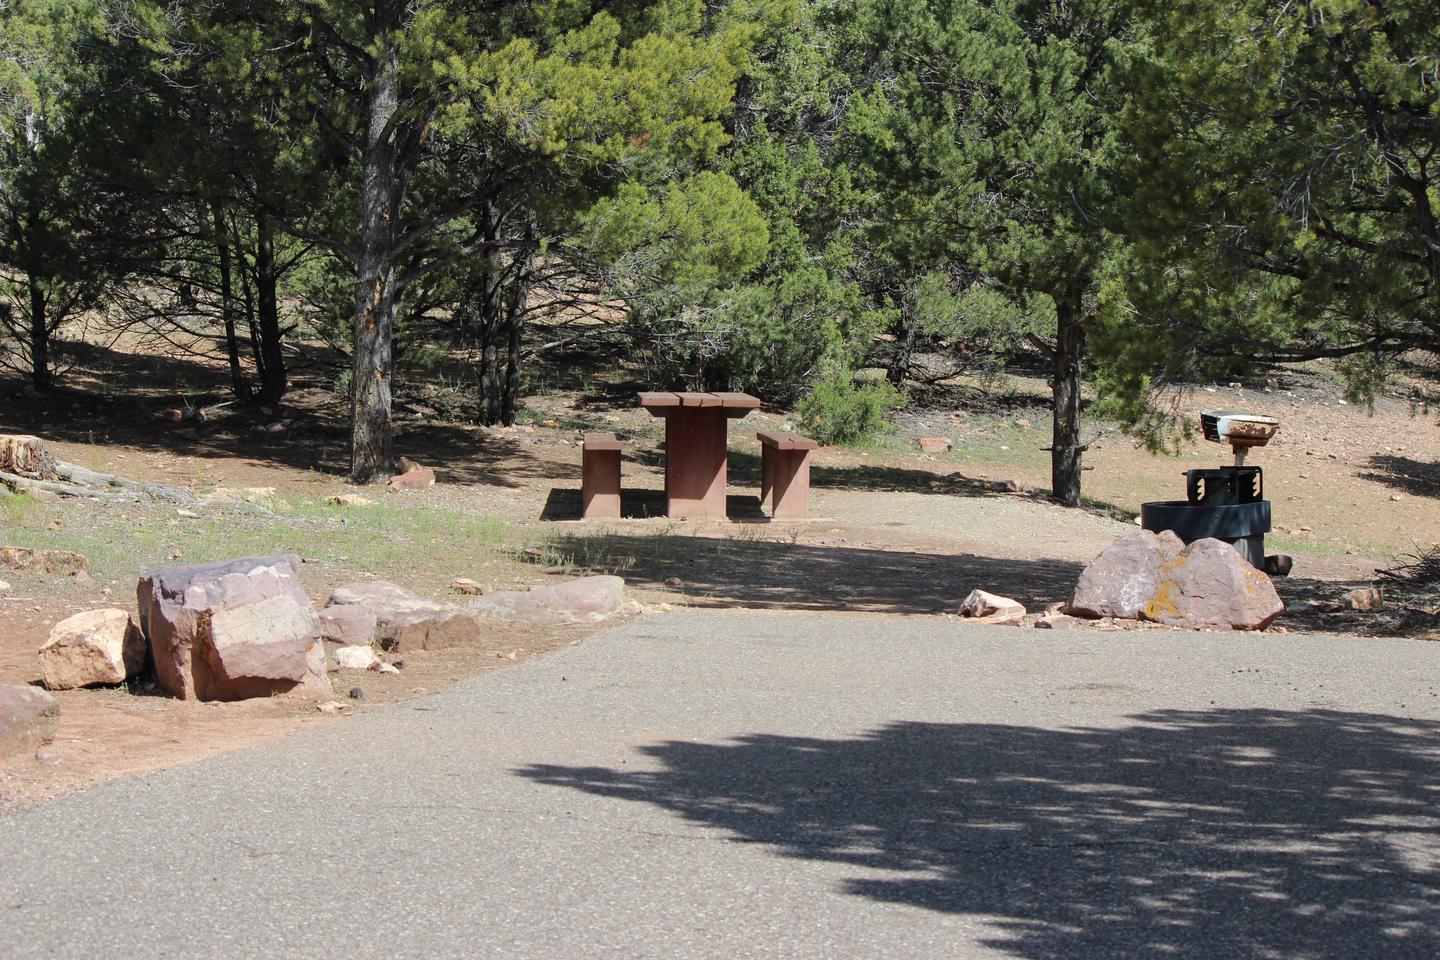 This site has a picnic table and fire pit with a grill grate in a gravel area behind a parking area. There are a number of trees in the background.Cedar Springs Campground: Site 3